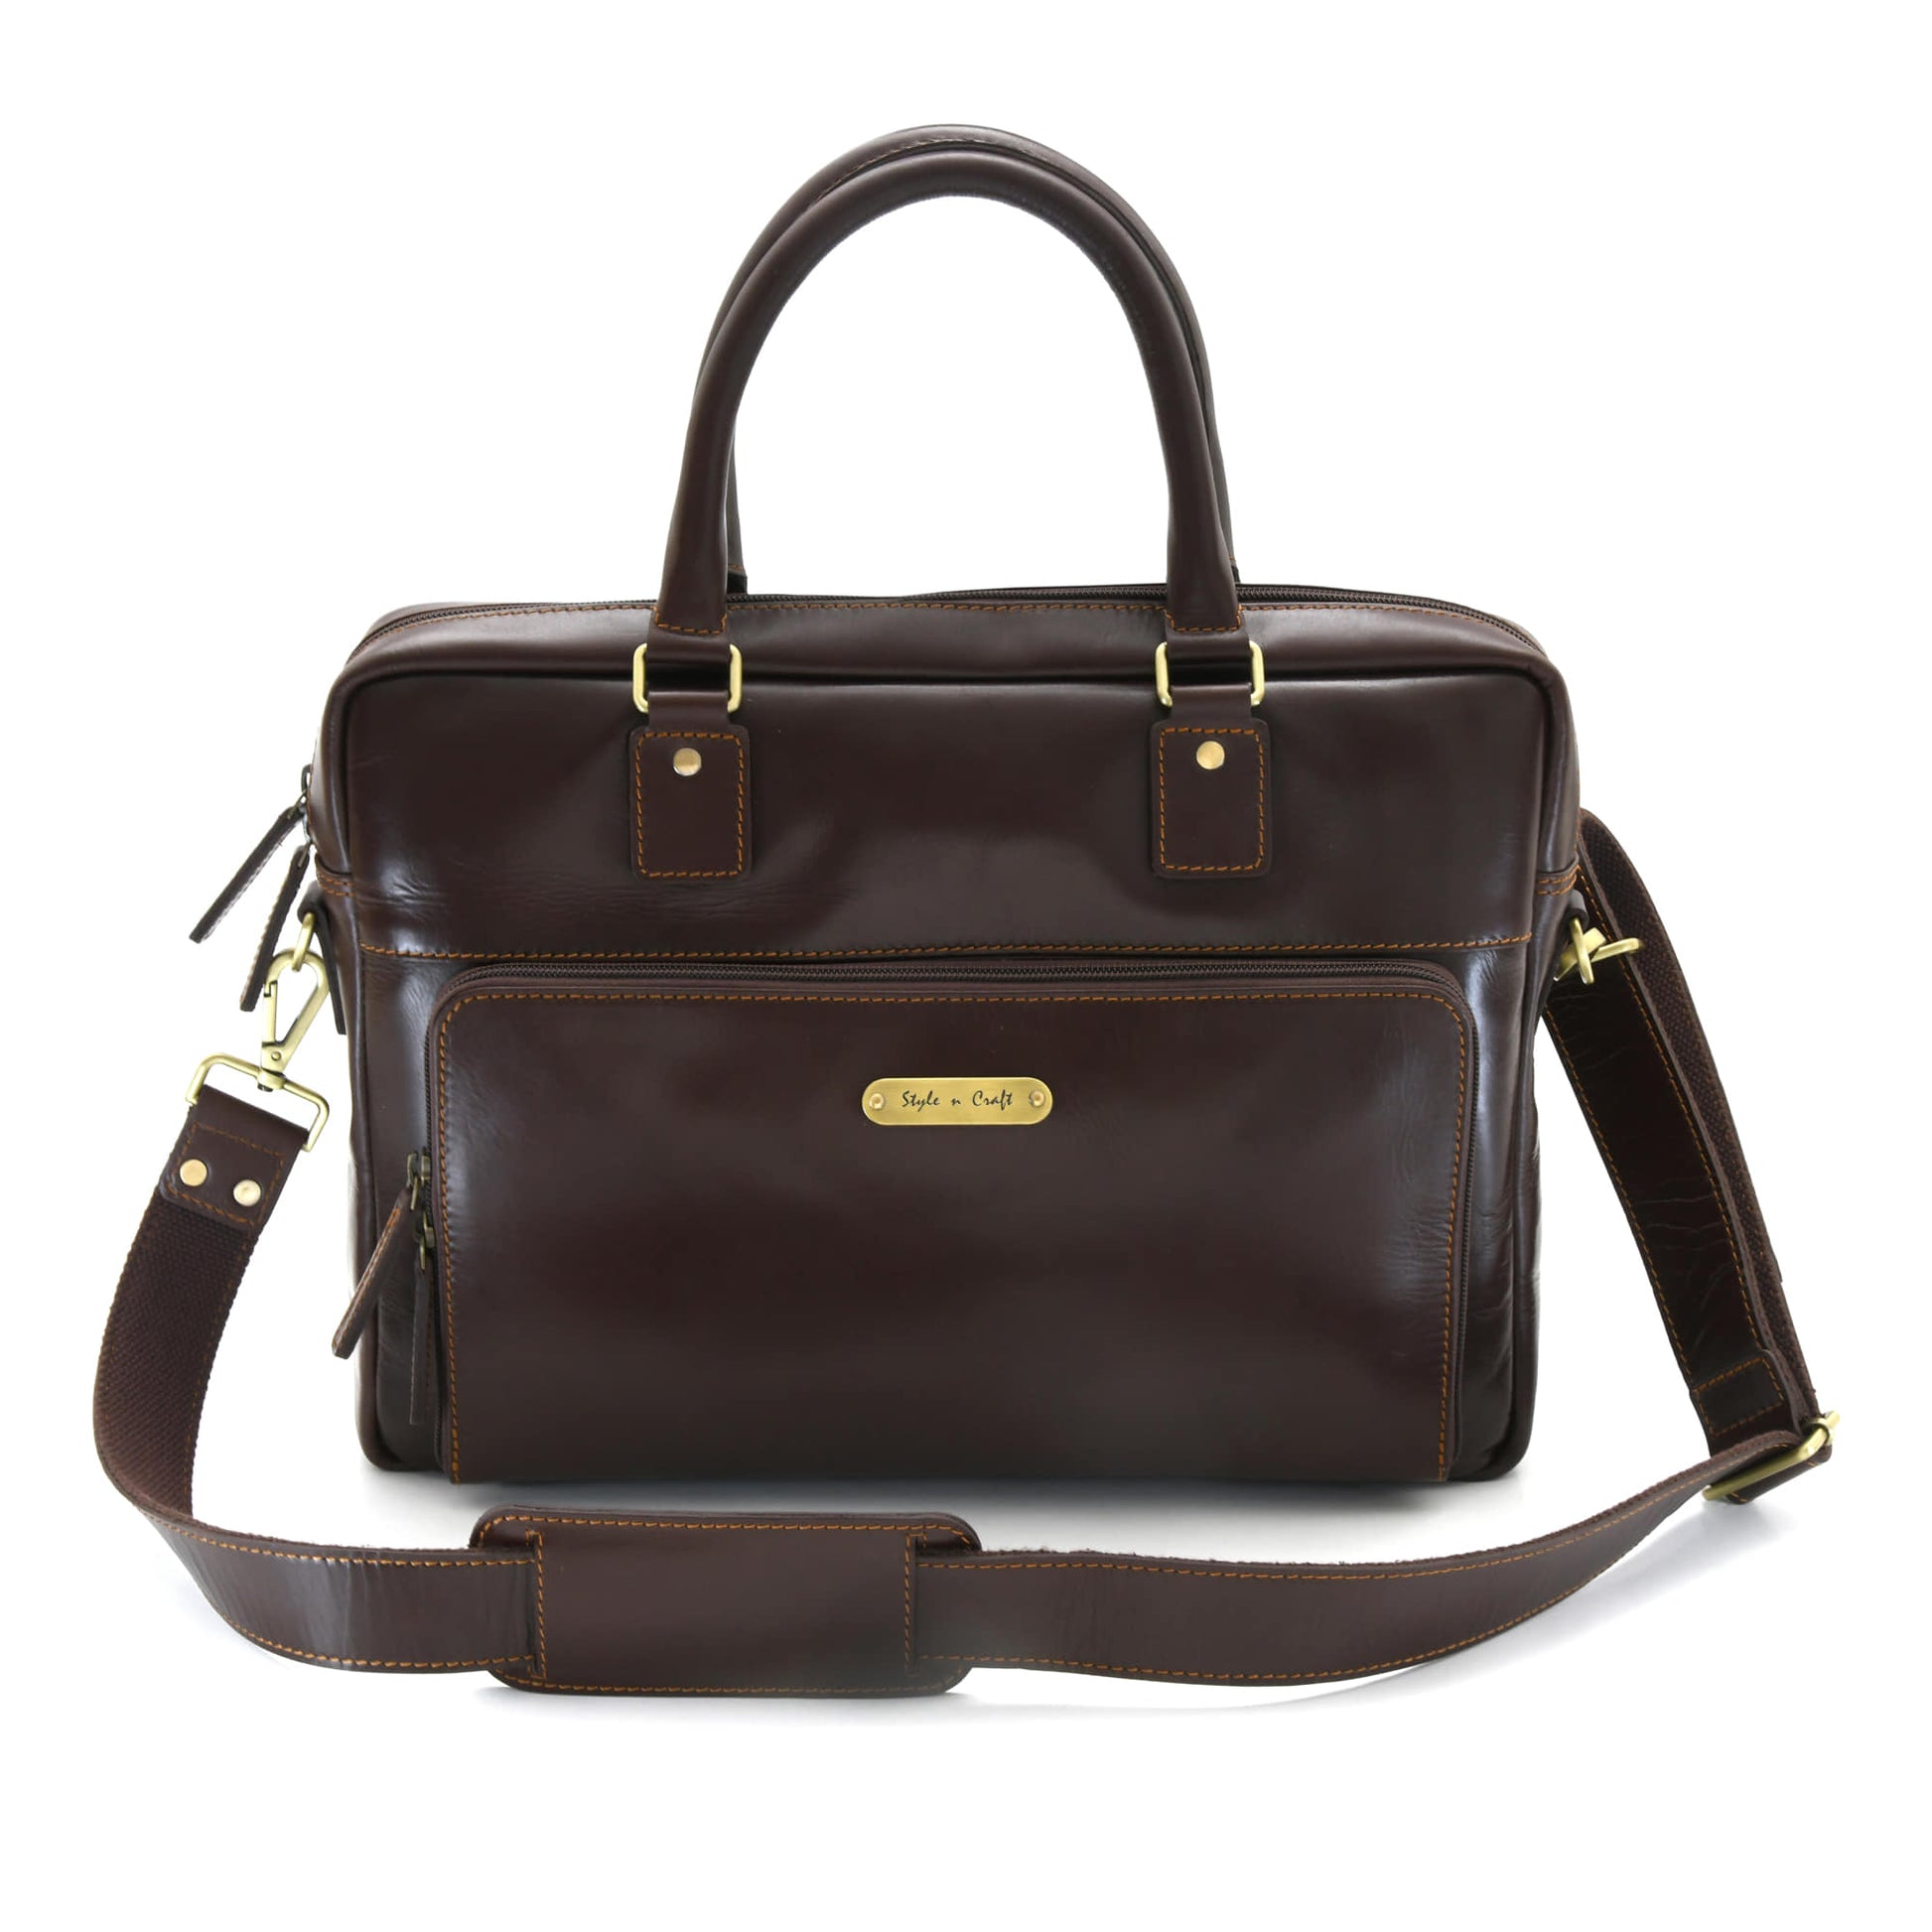 Style n Craft 392009 Men's Portfolio Briefcase Bag in Full Grain Dark Brown Leather - Front View showing the Overall Bag & the External Zippered Pocket